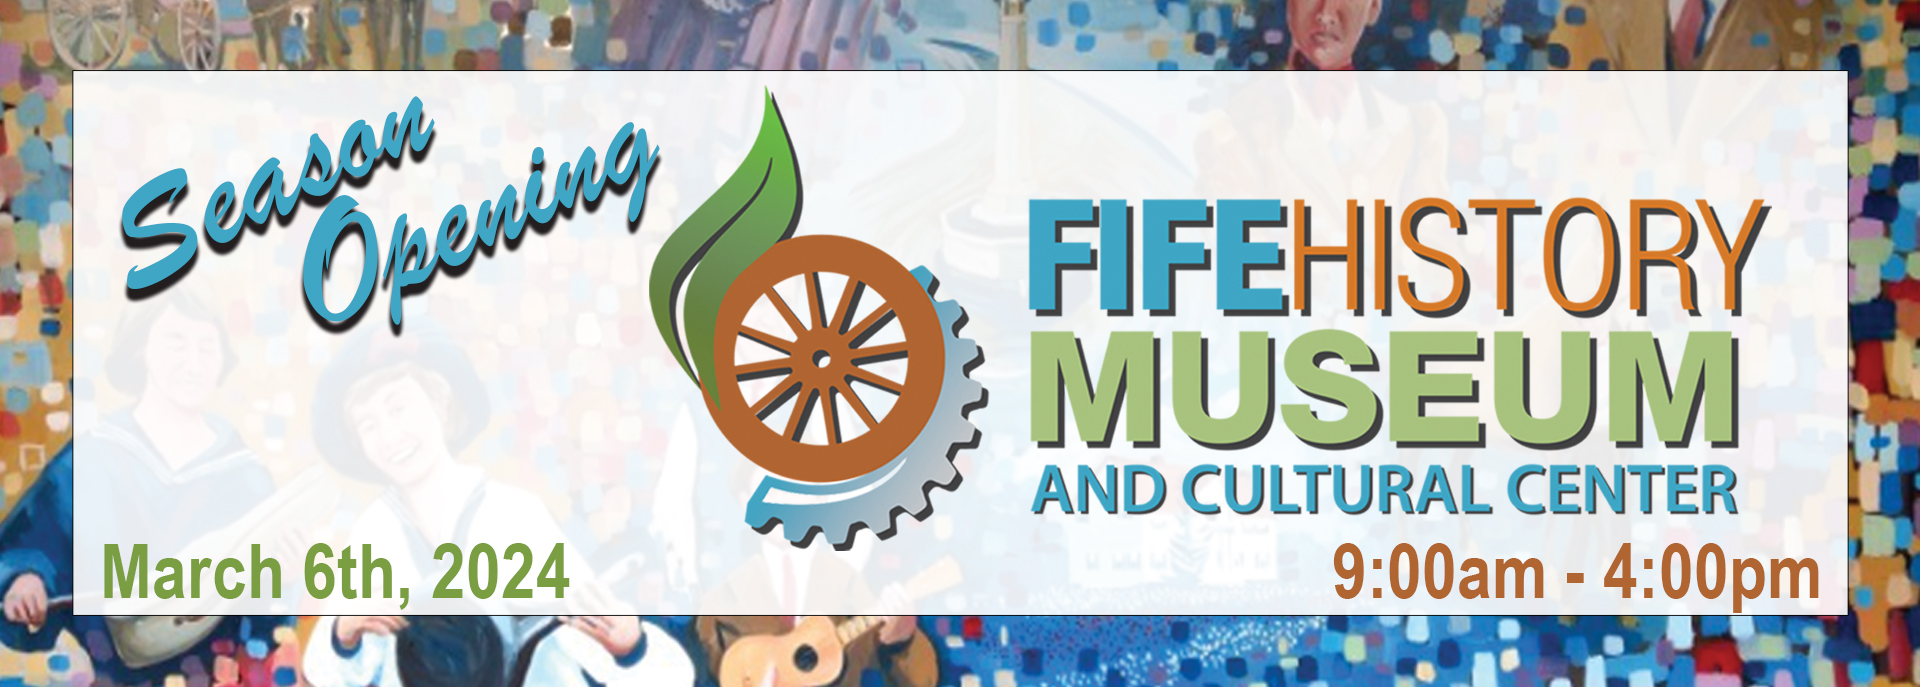 Fife History Museum Season Opener is Wednesday, March 6th from 9am - 4pm